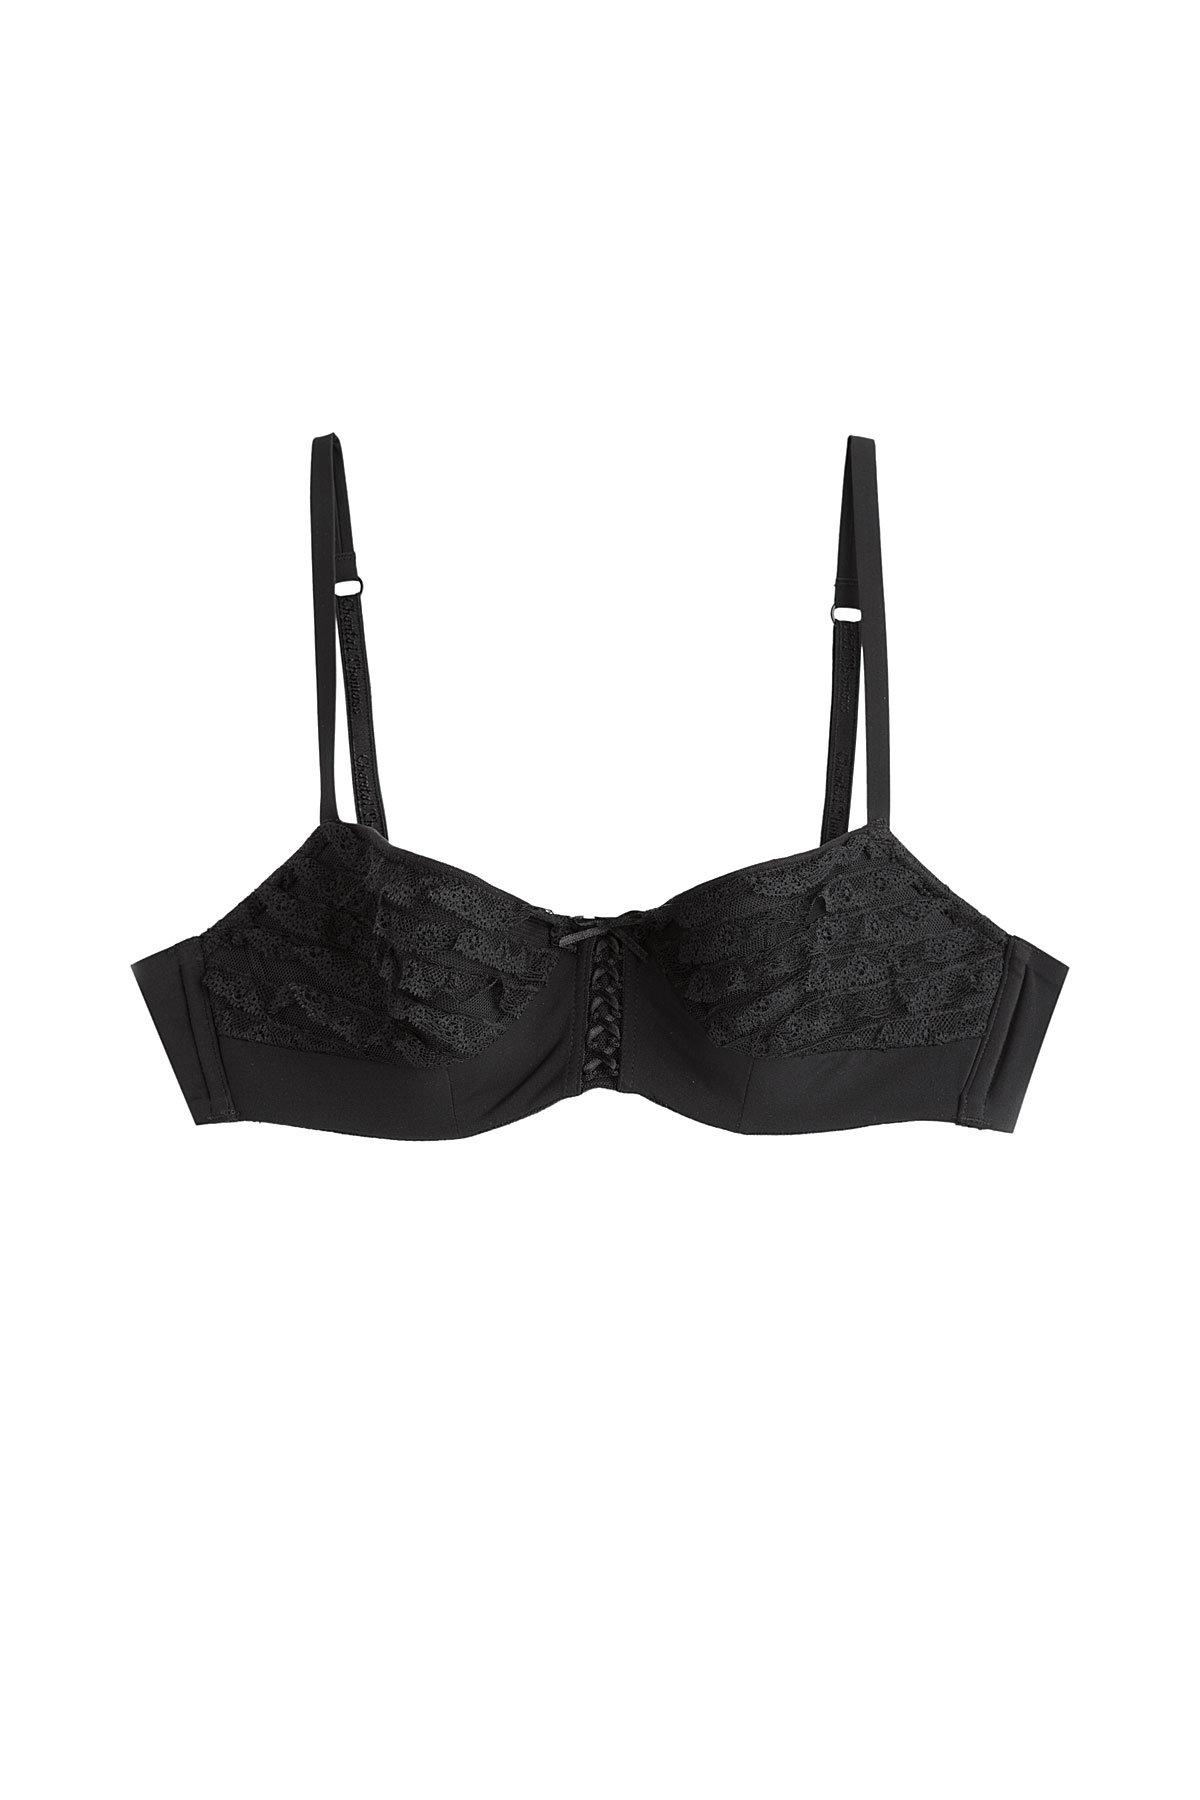 Chantal Thomass Push Up Balconette Bra With Lace In Black | ModeSens